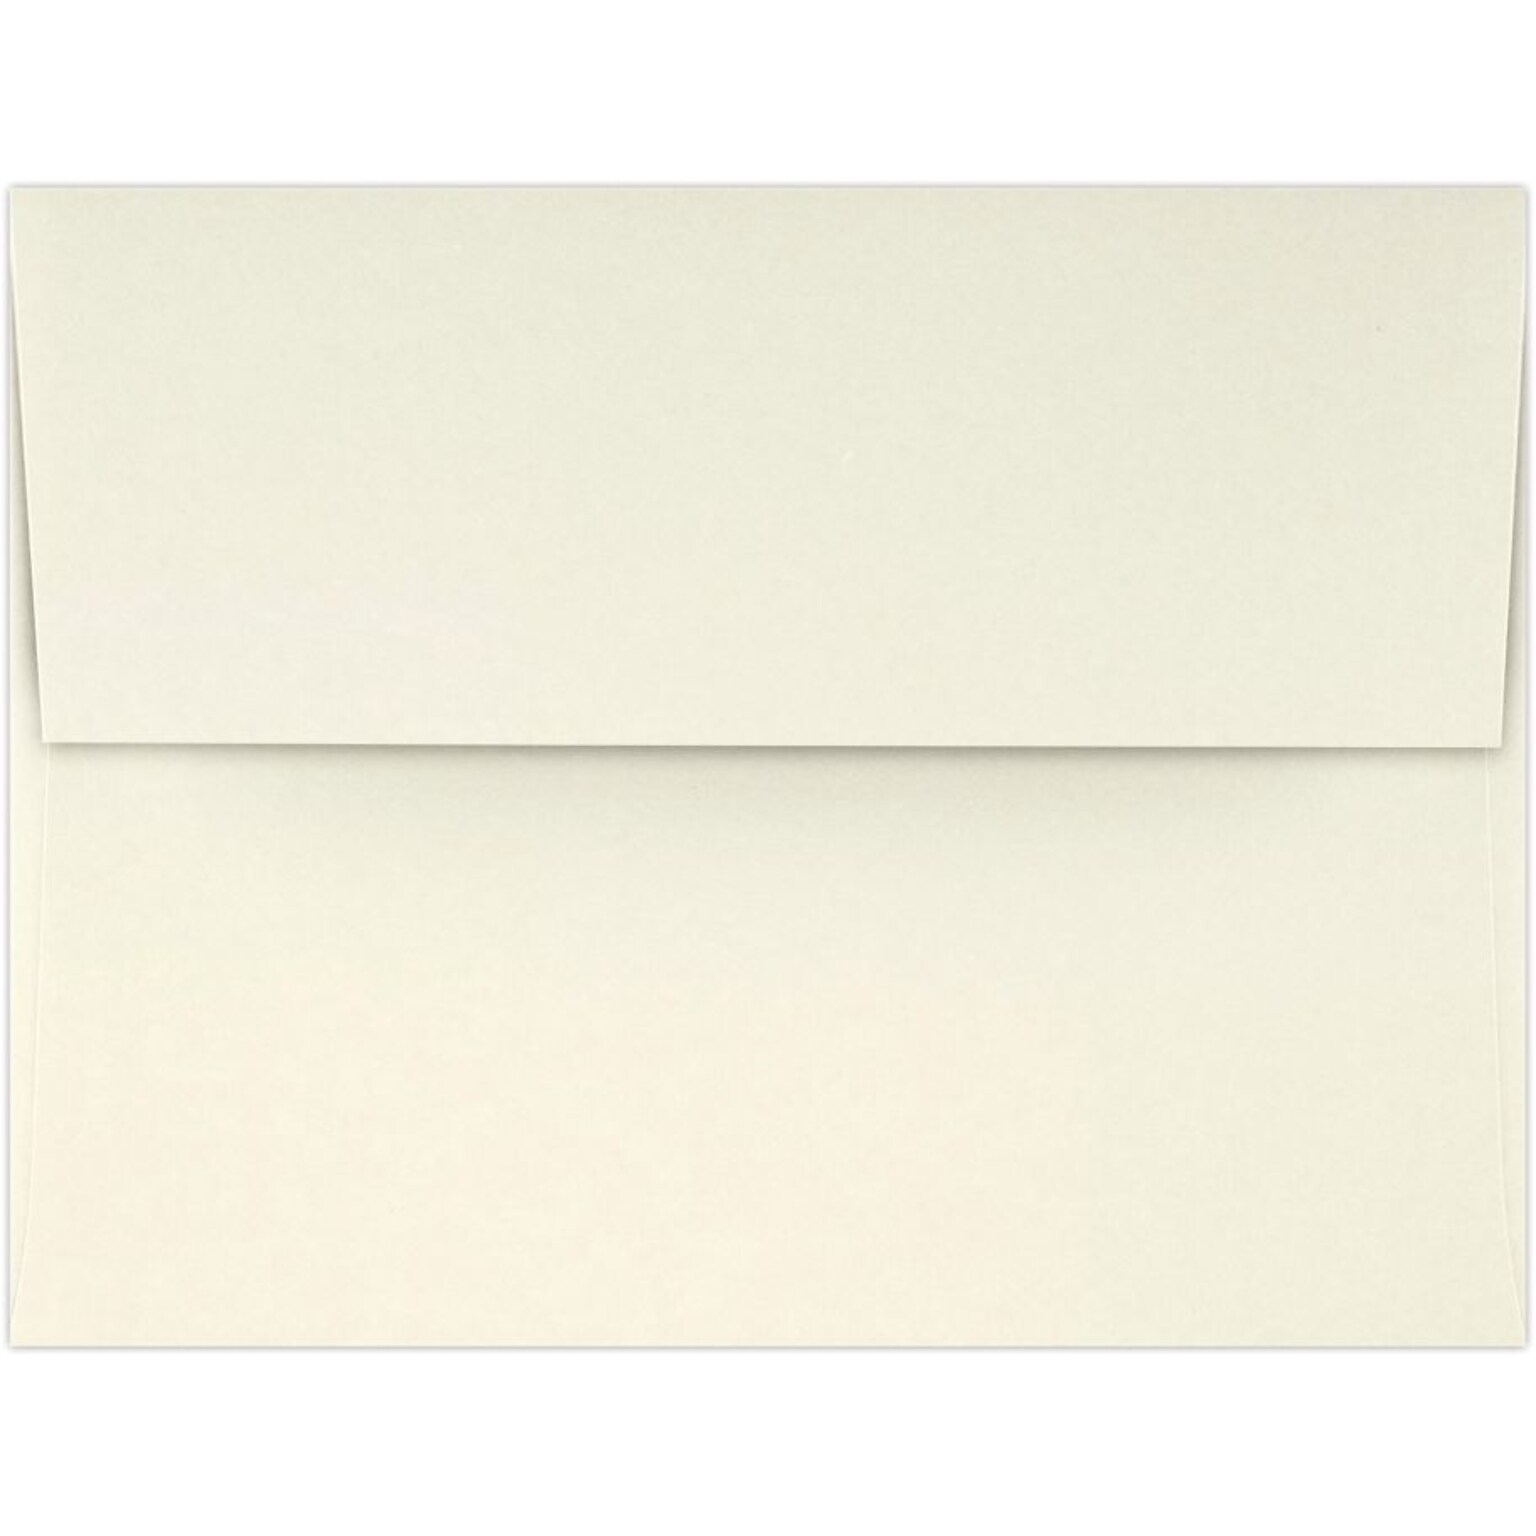 LUX A2 (4 3/8 x 5 3/4) - Natural 100% Recycled 50/Pack, Natural - 100% Recycled (4870-NPC-50)